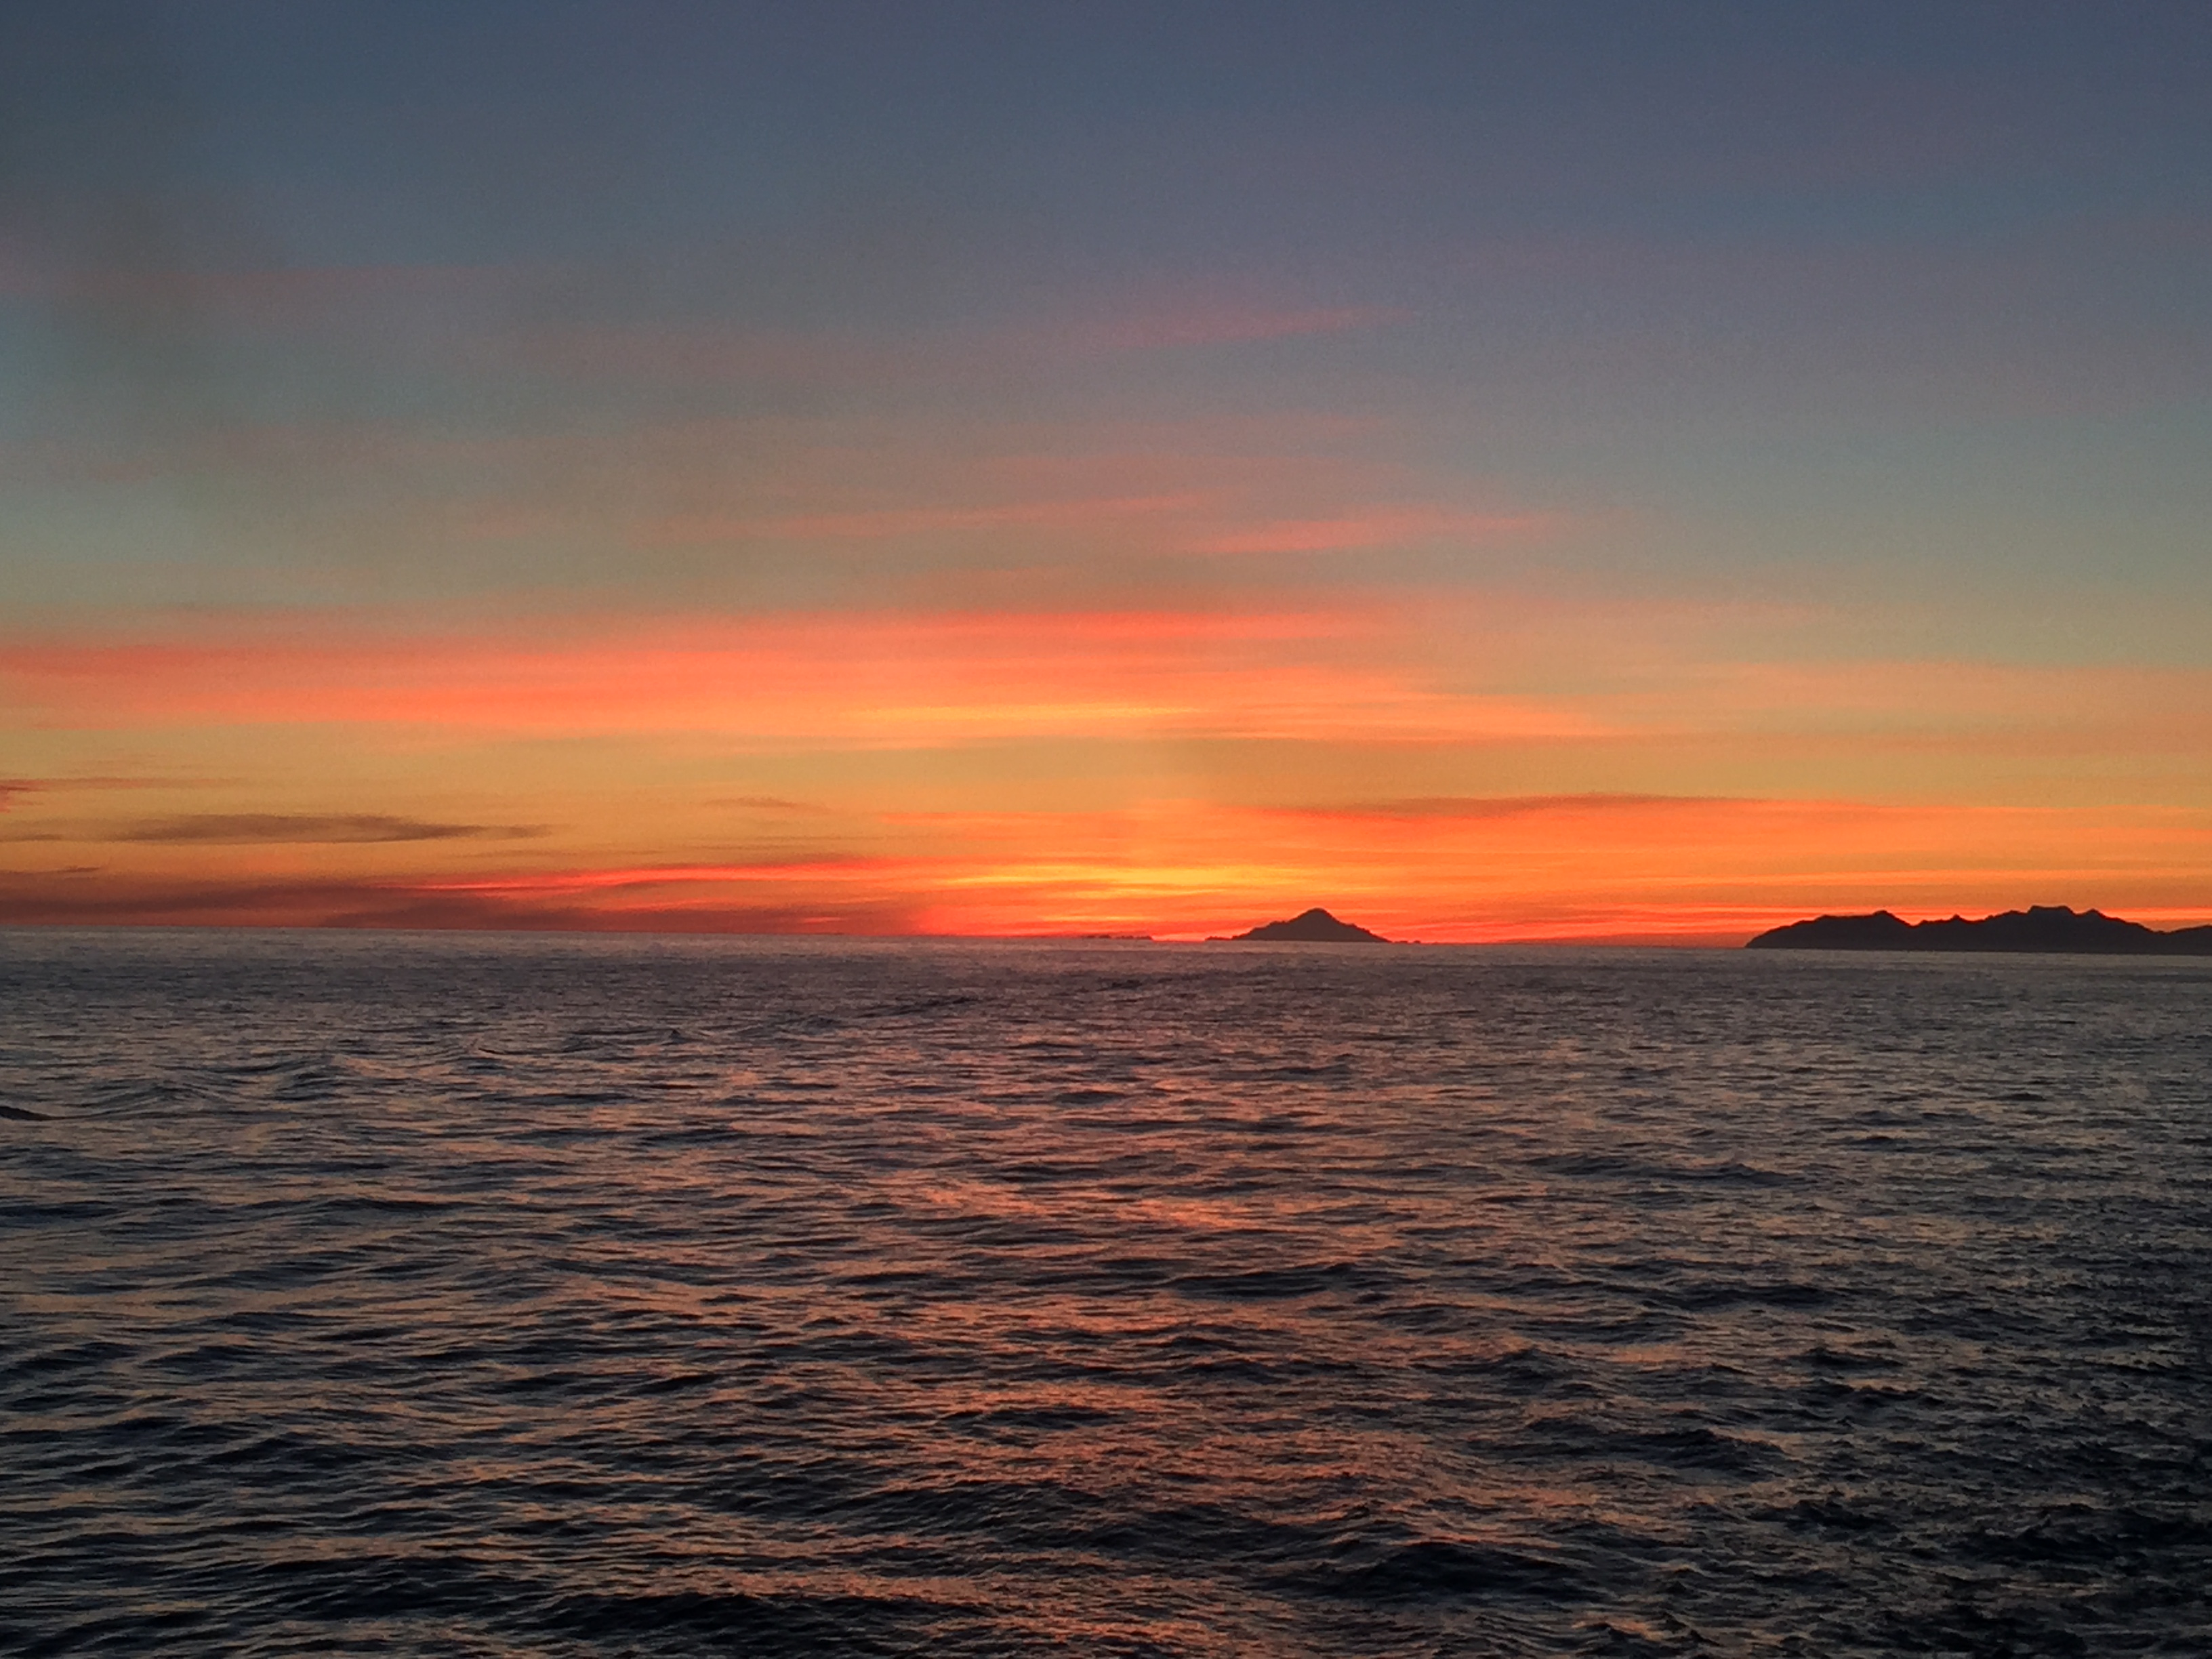 Beautiful sunsets at sea are one of the perks of working on a cruise ship.